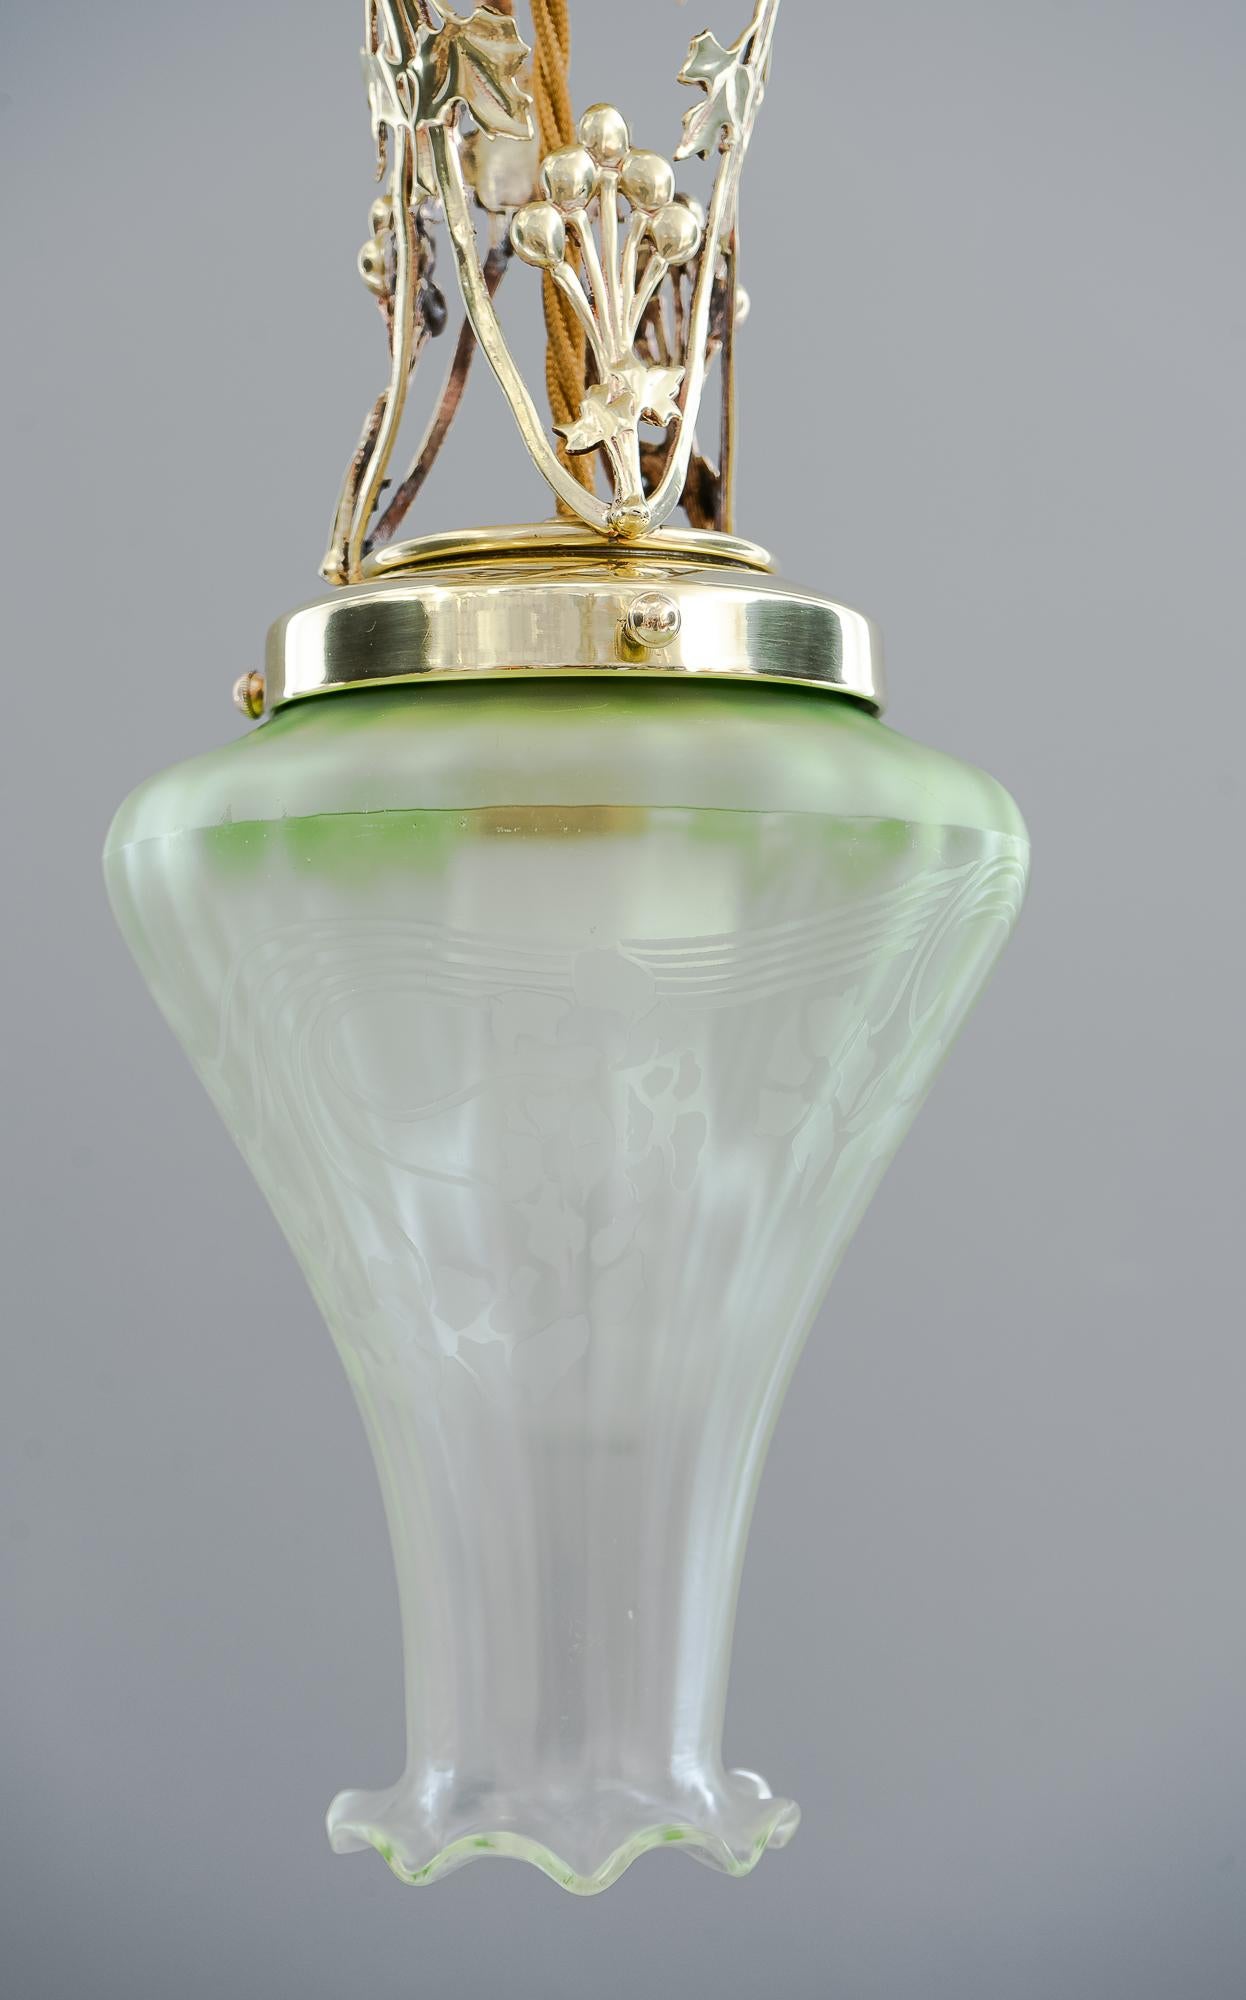 Jugendstil Ceiling Lamp Vienna circa 1908 with Original Glass Shade For Sale 4